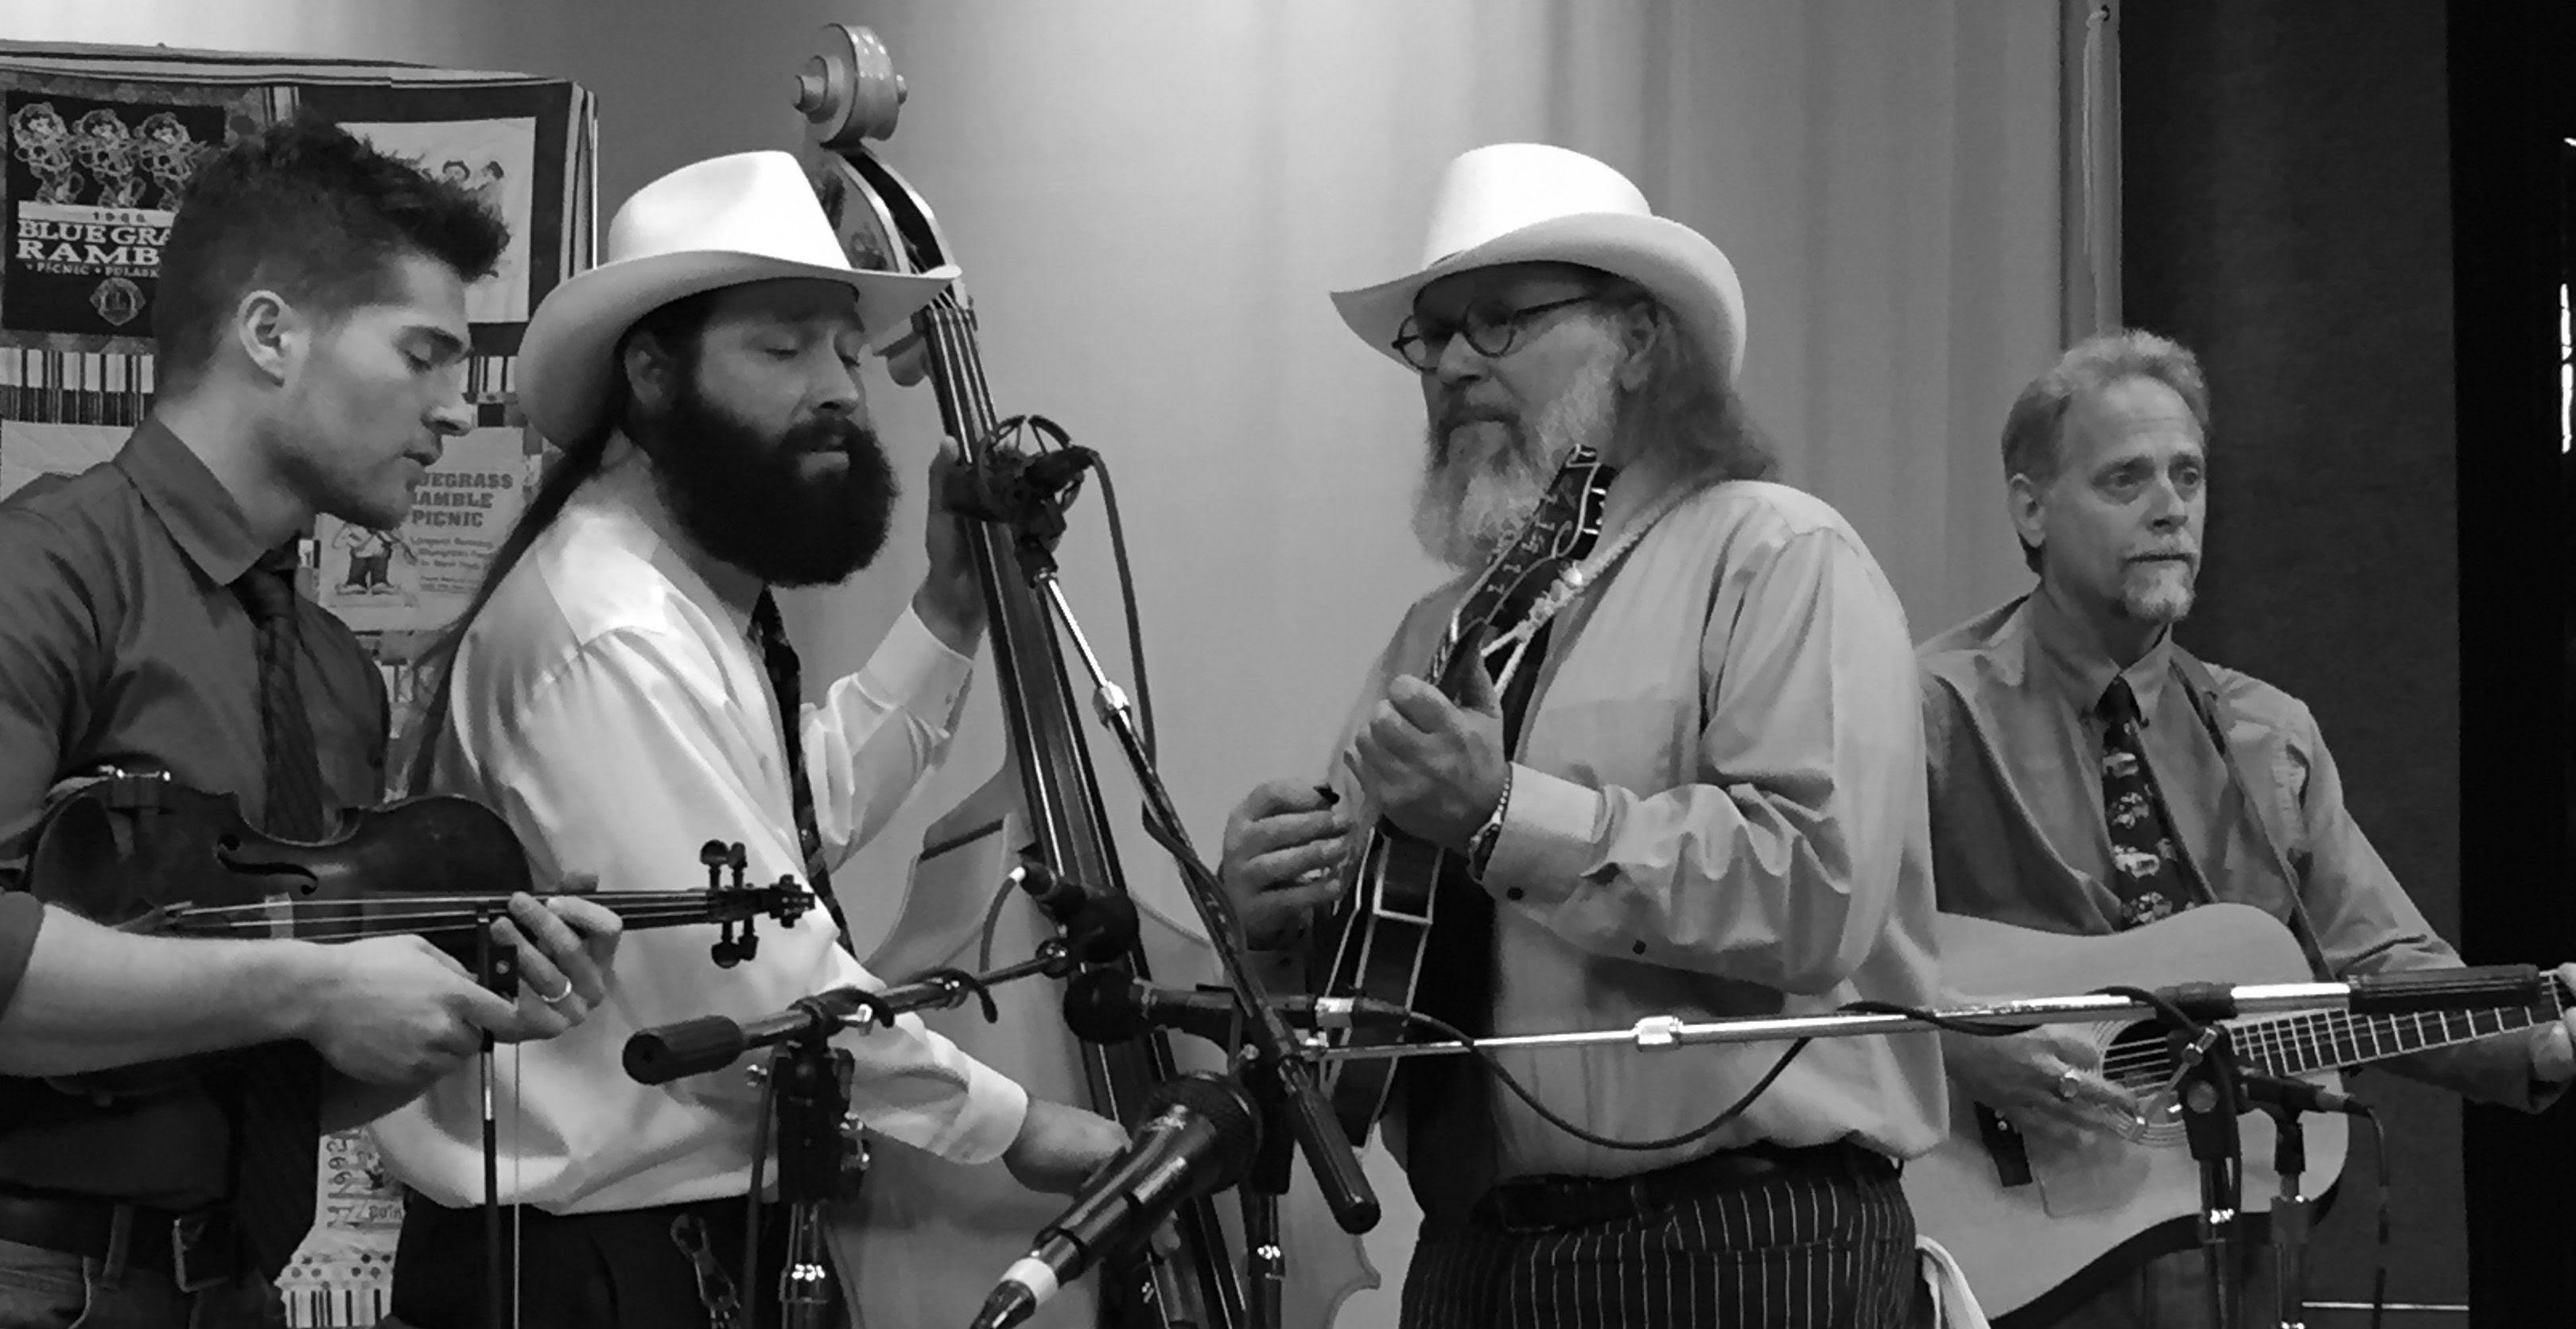 Delaney Brothers Bluegrass performing